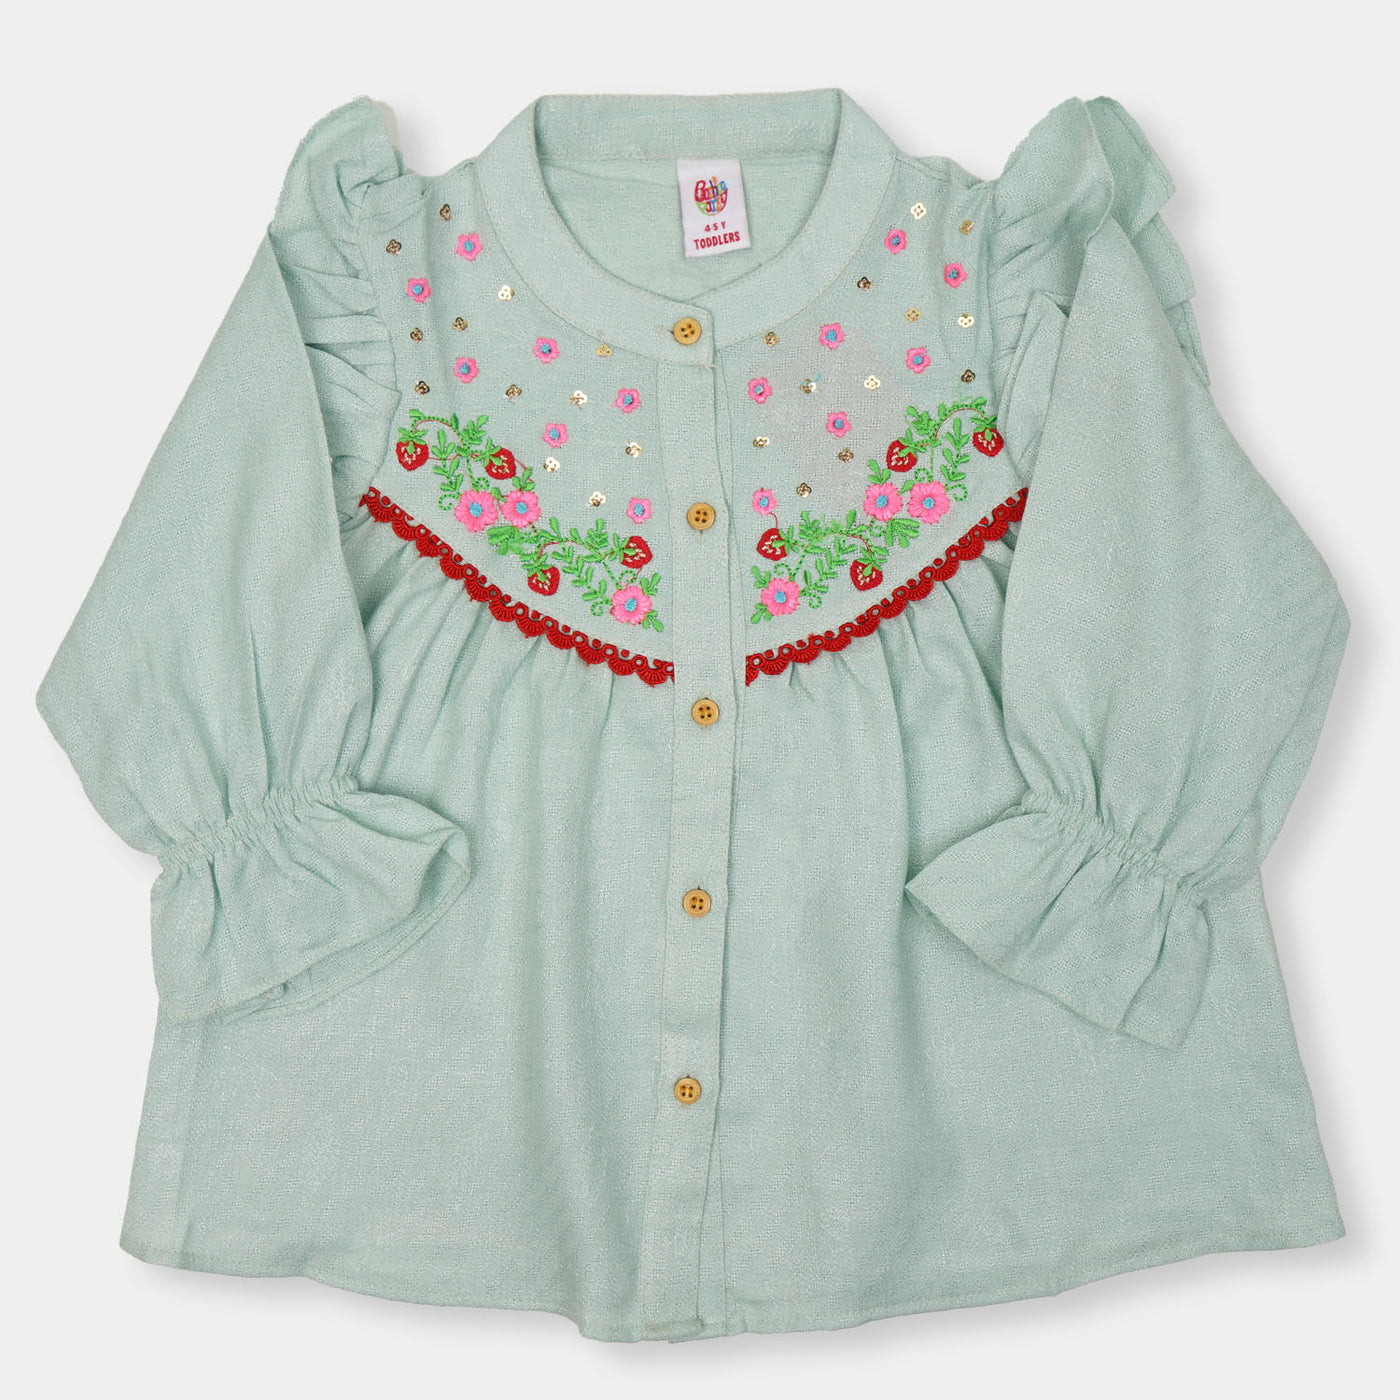 Girls Embroidered Top Strawberry - Mint